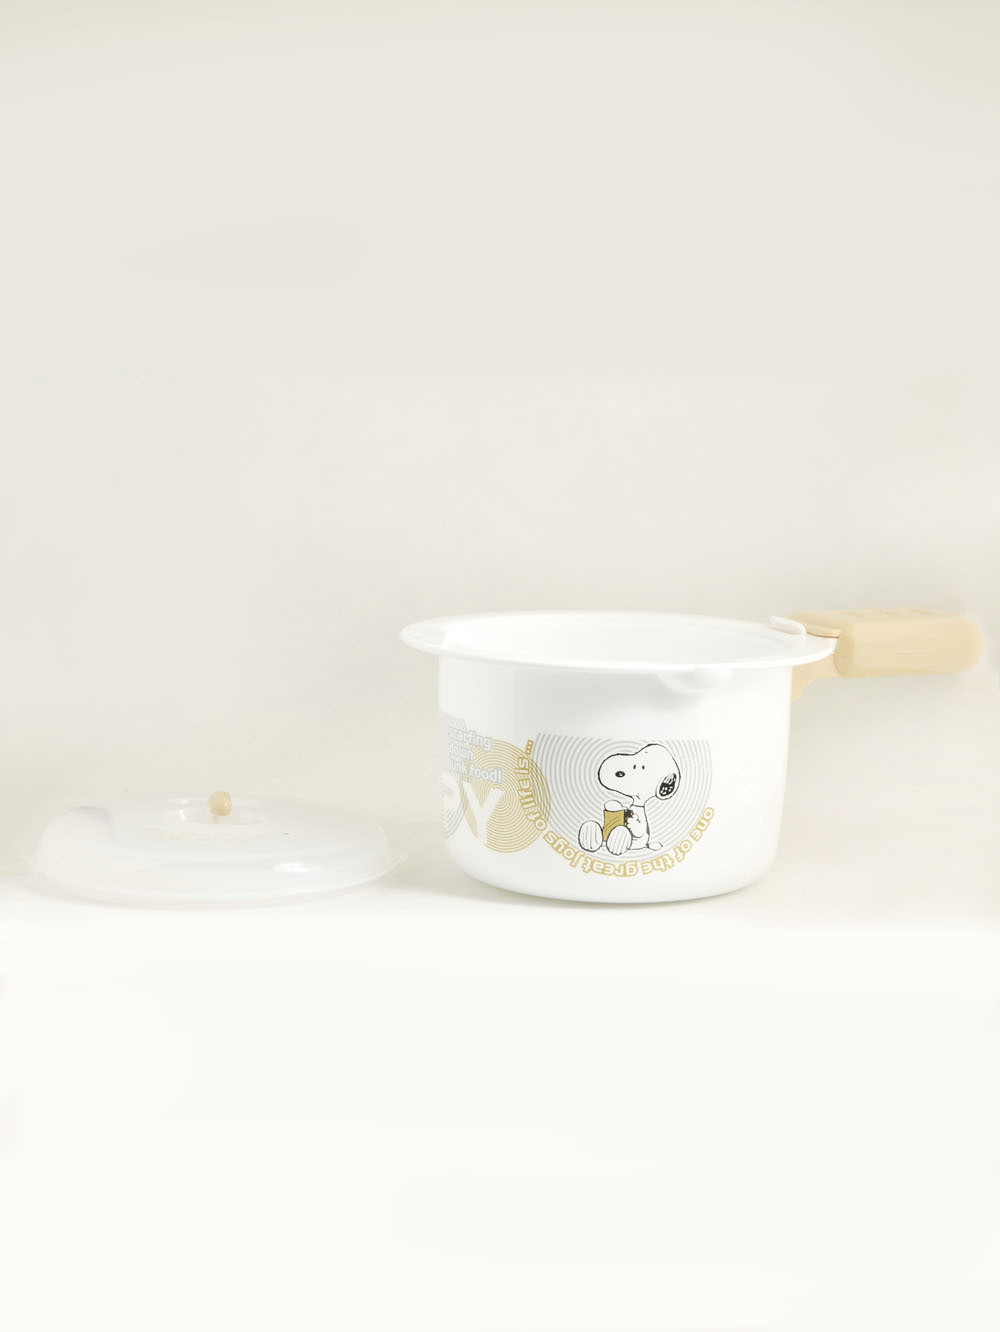 SP-C308 Snoopy warm microwave soup cooker3